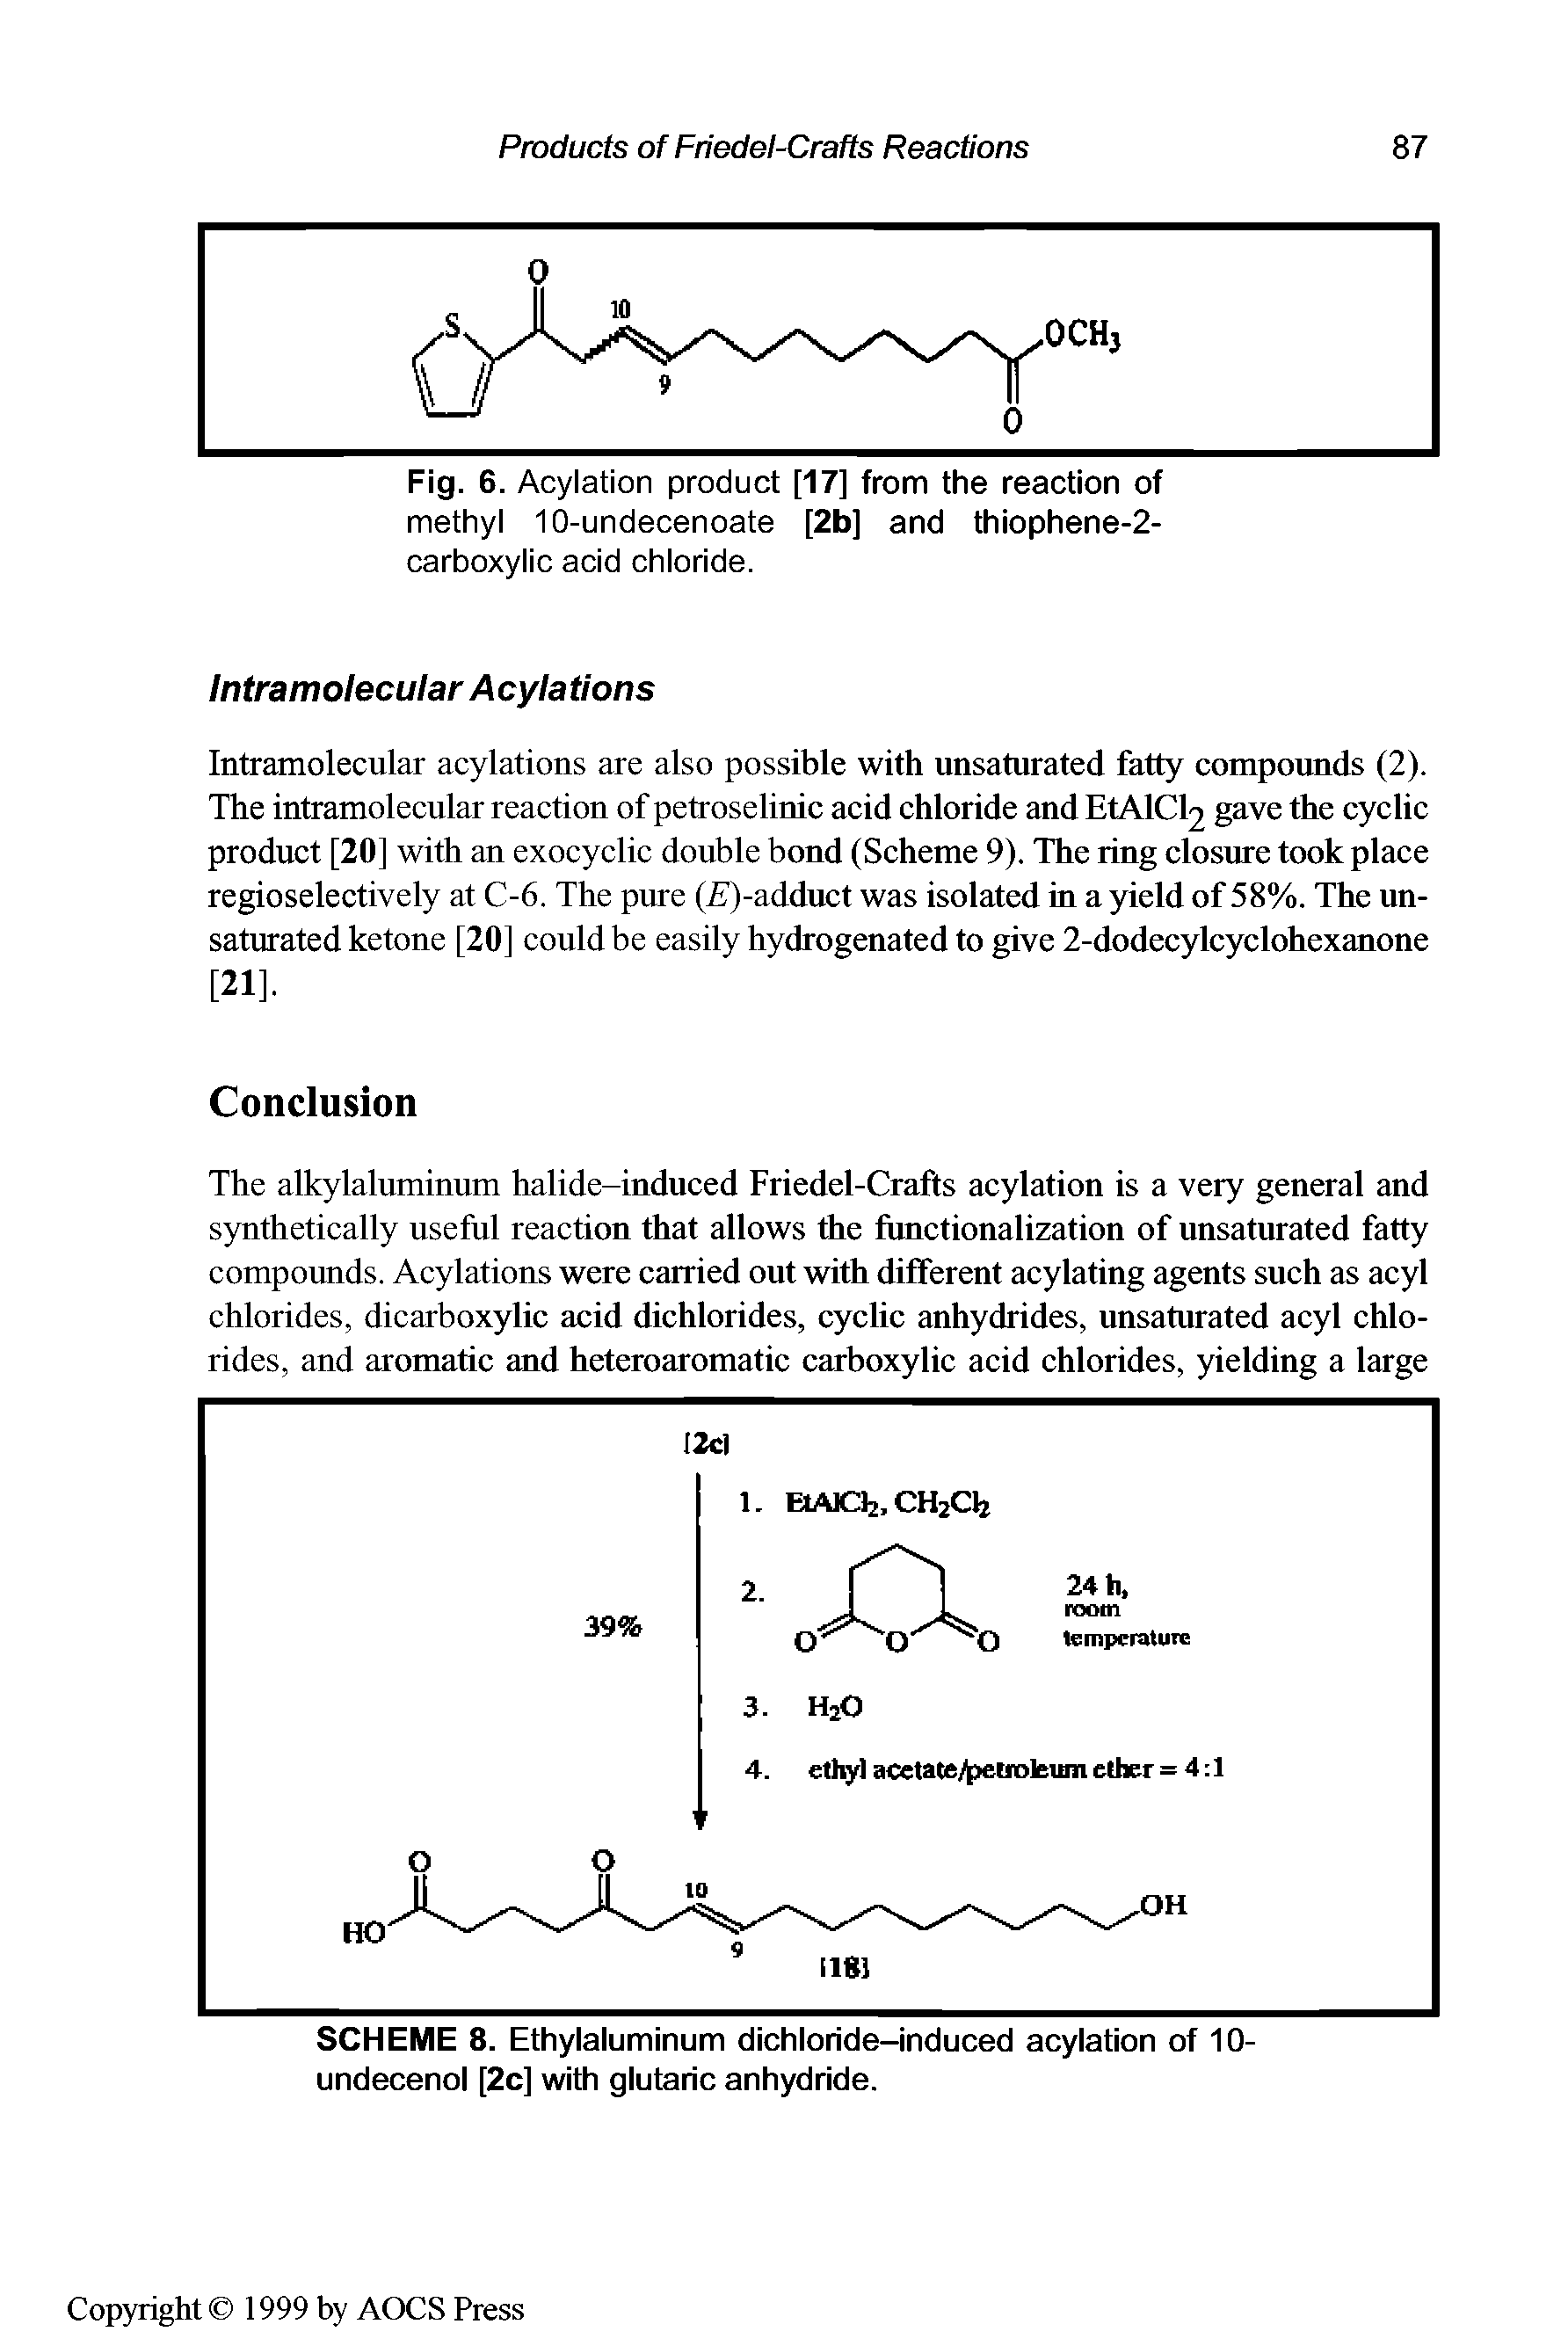 Fig. 6. Acylation product [17] from the reaction of methyl 10-undecenoate [2b] and thiophene-2-carboxylic acid chloride.